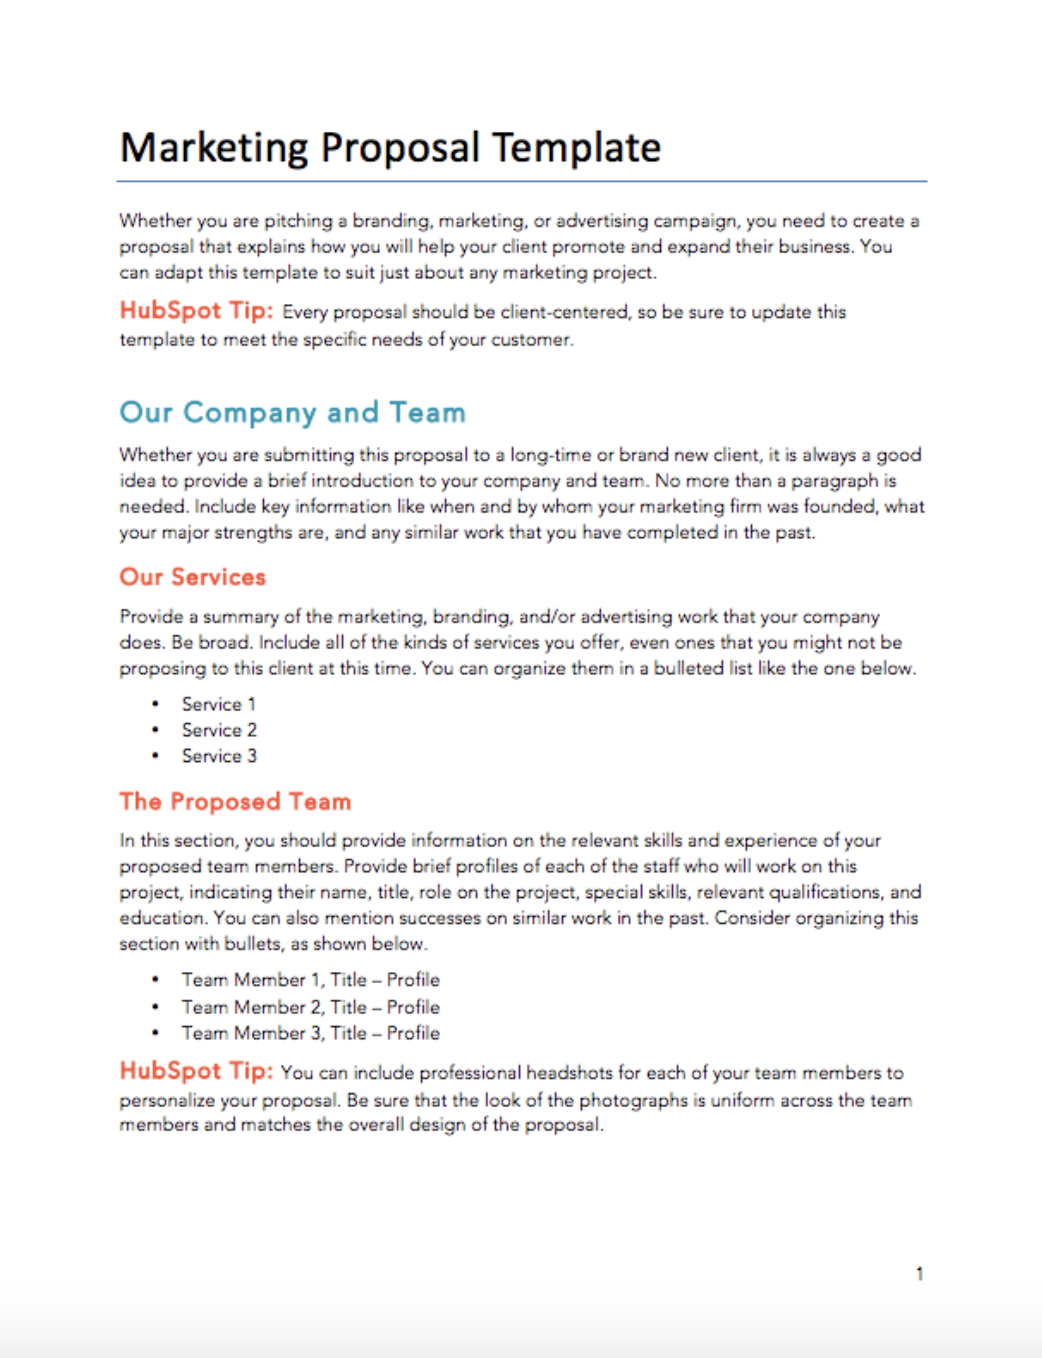 Free Marketing Proposal Template for PDF  Word  HubSpot With Idea Proposal Template